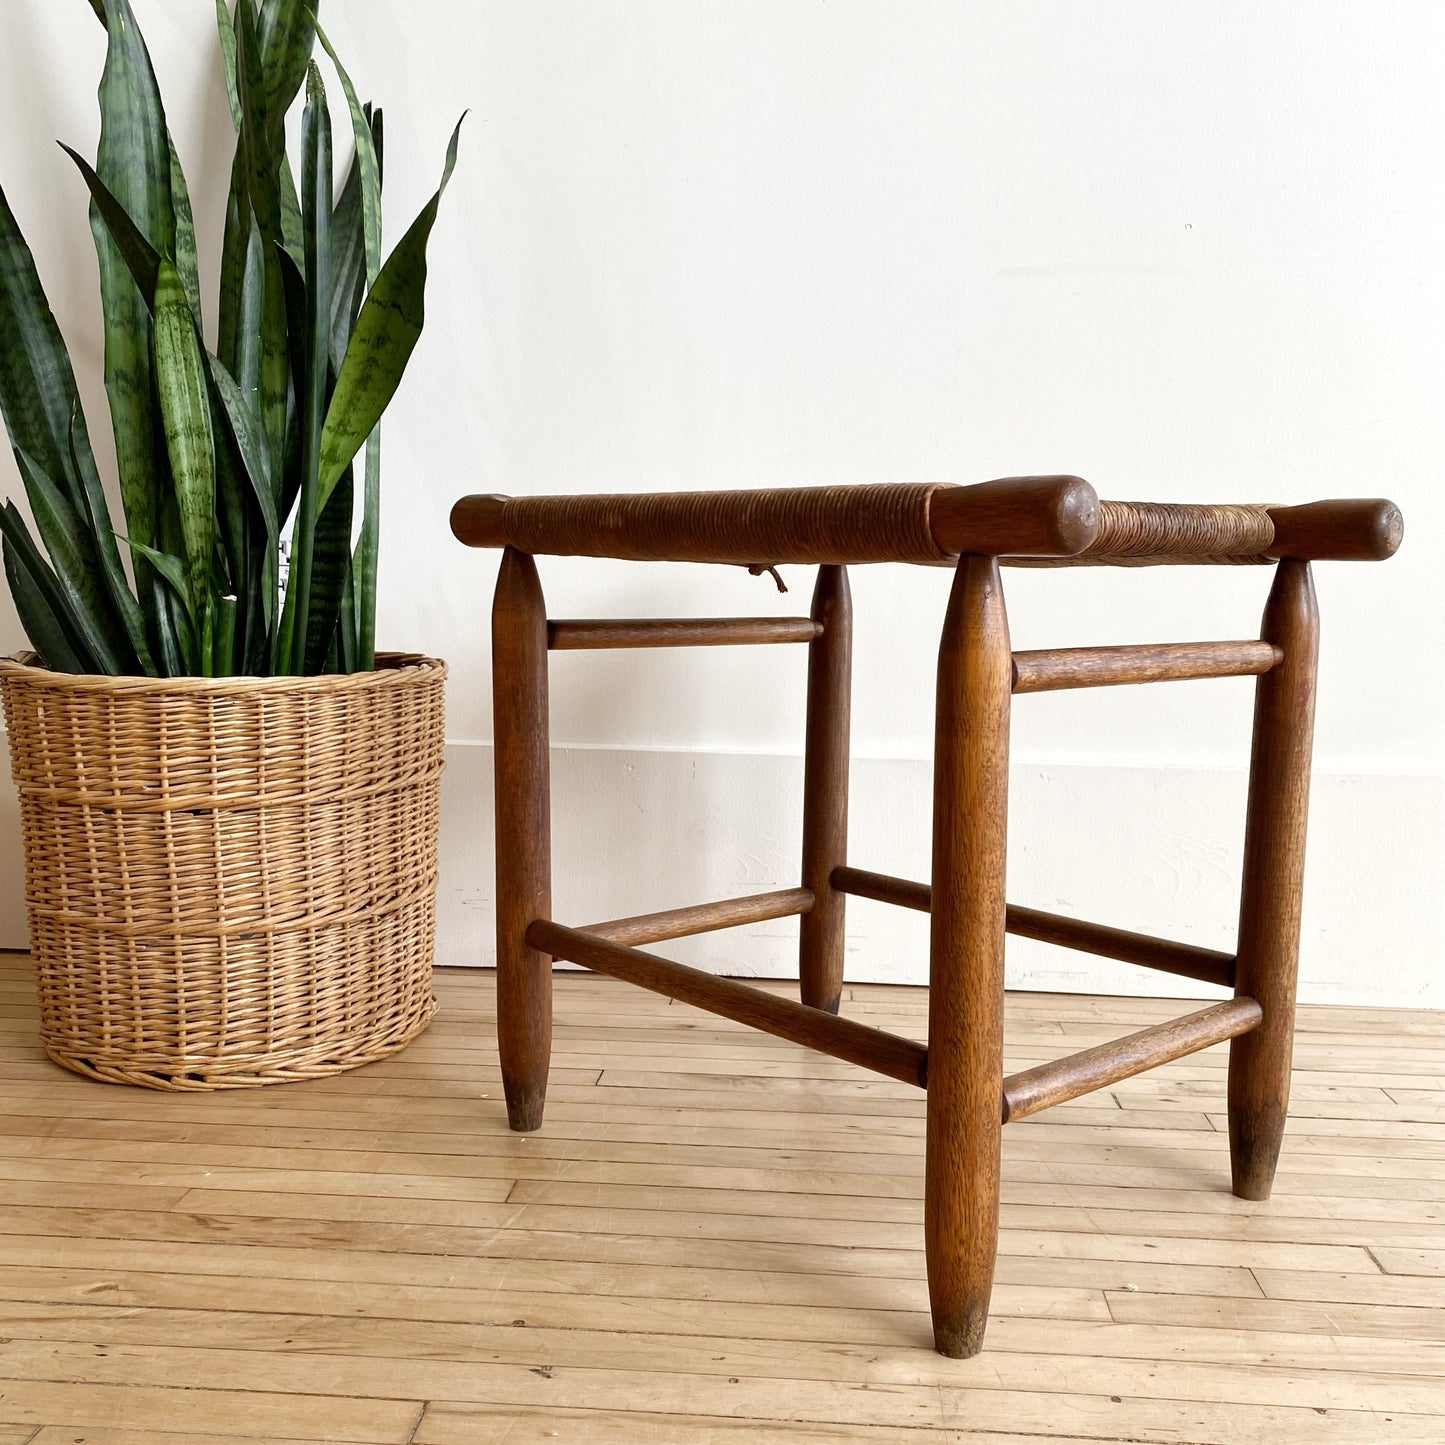 Found Antique Handwoven Paper Cord Stool